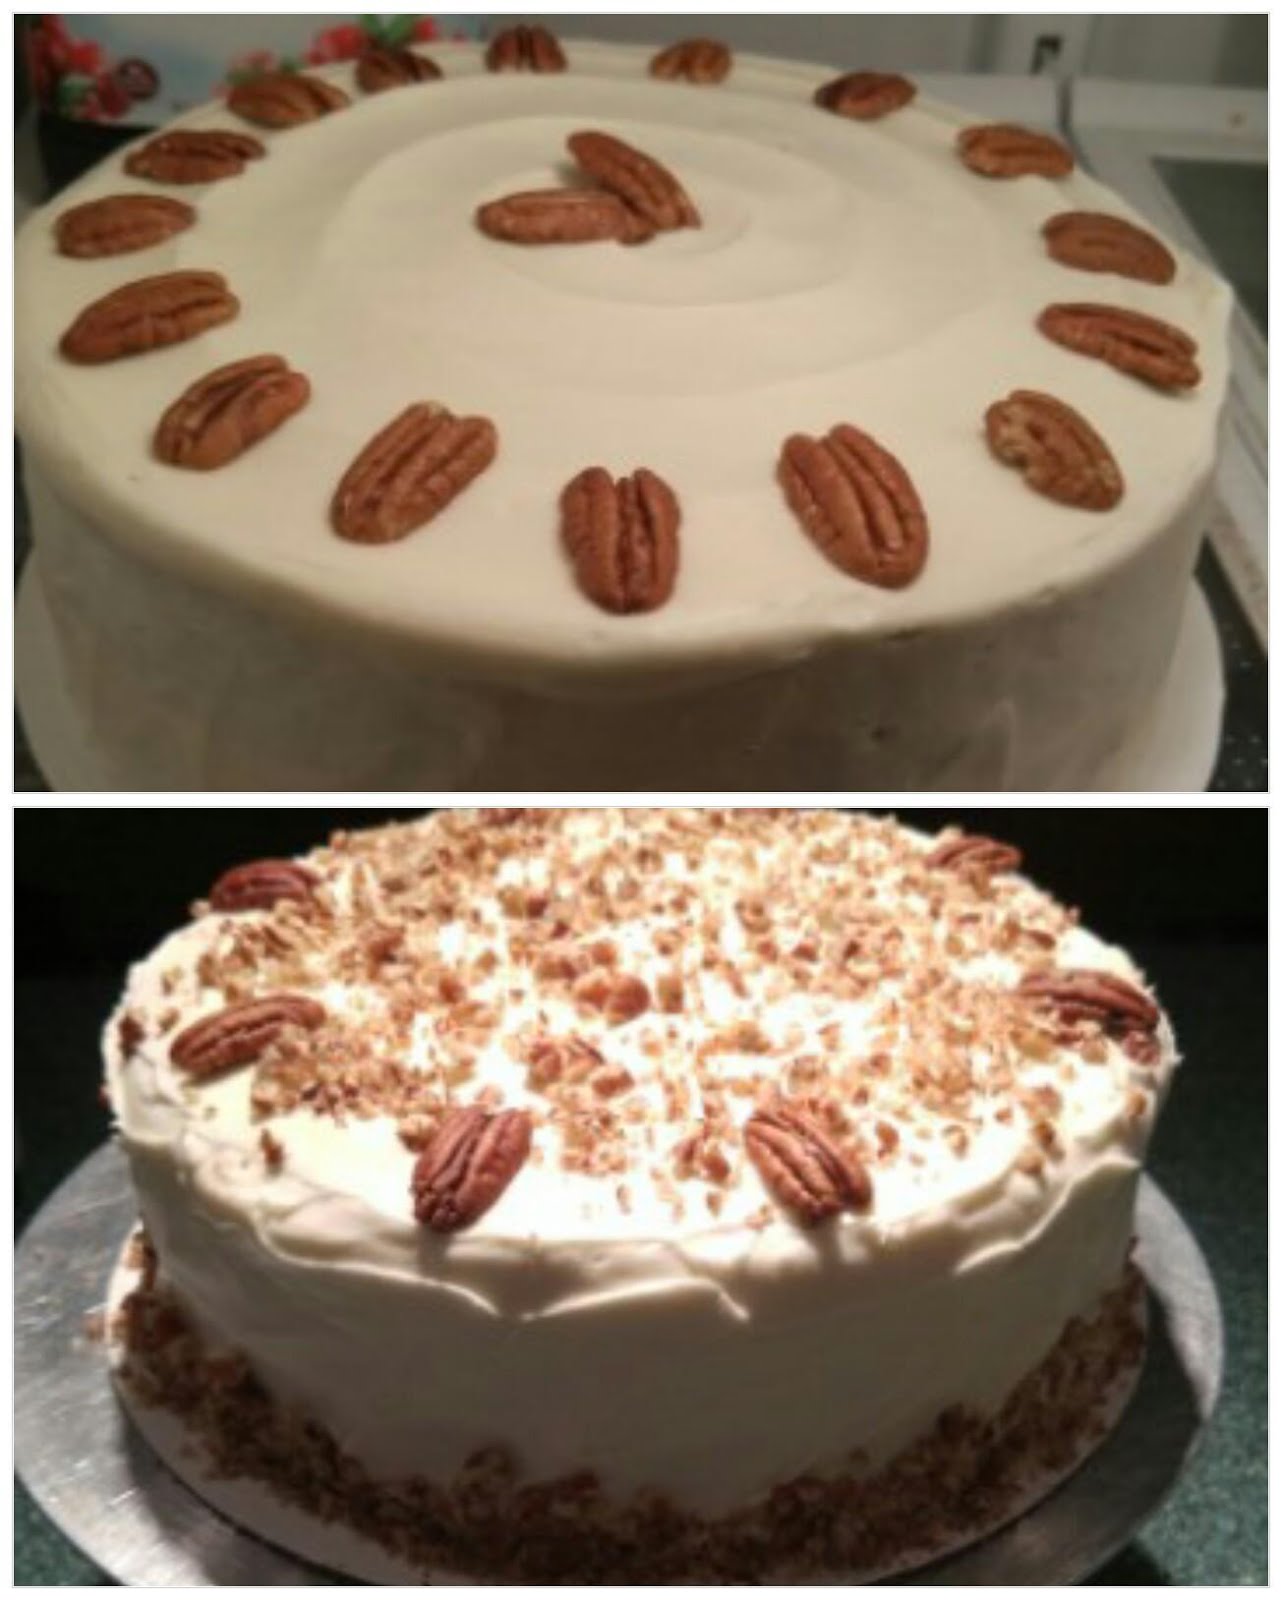 Robin's Carrot Cake with Cream Cheese Frosting